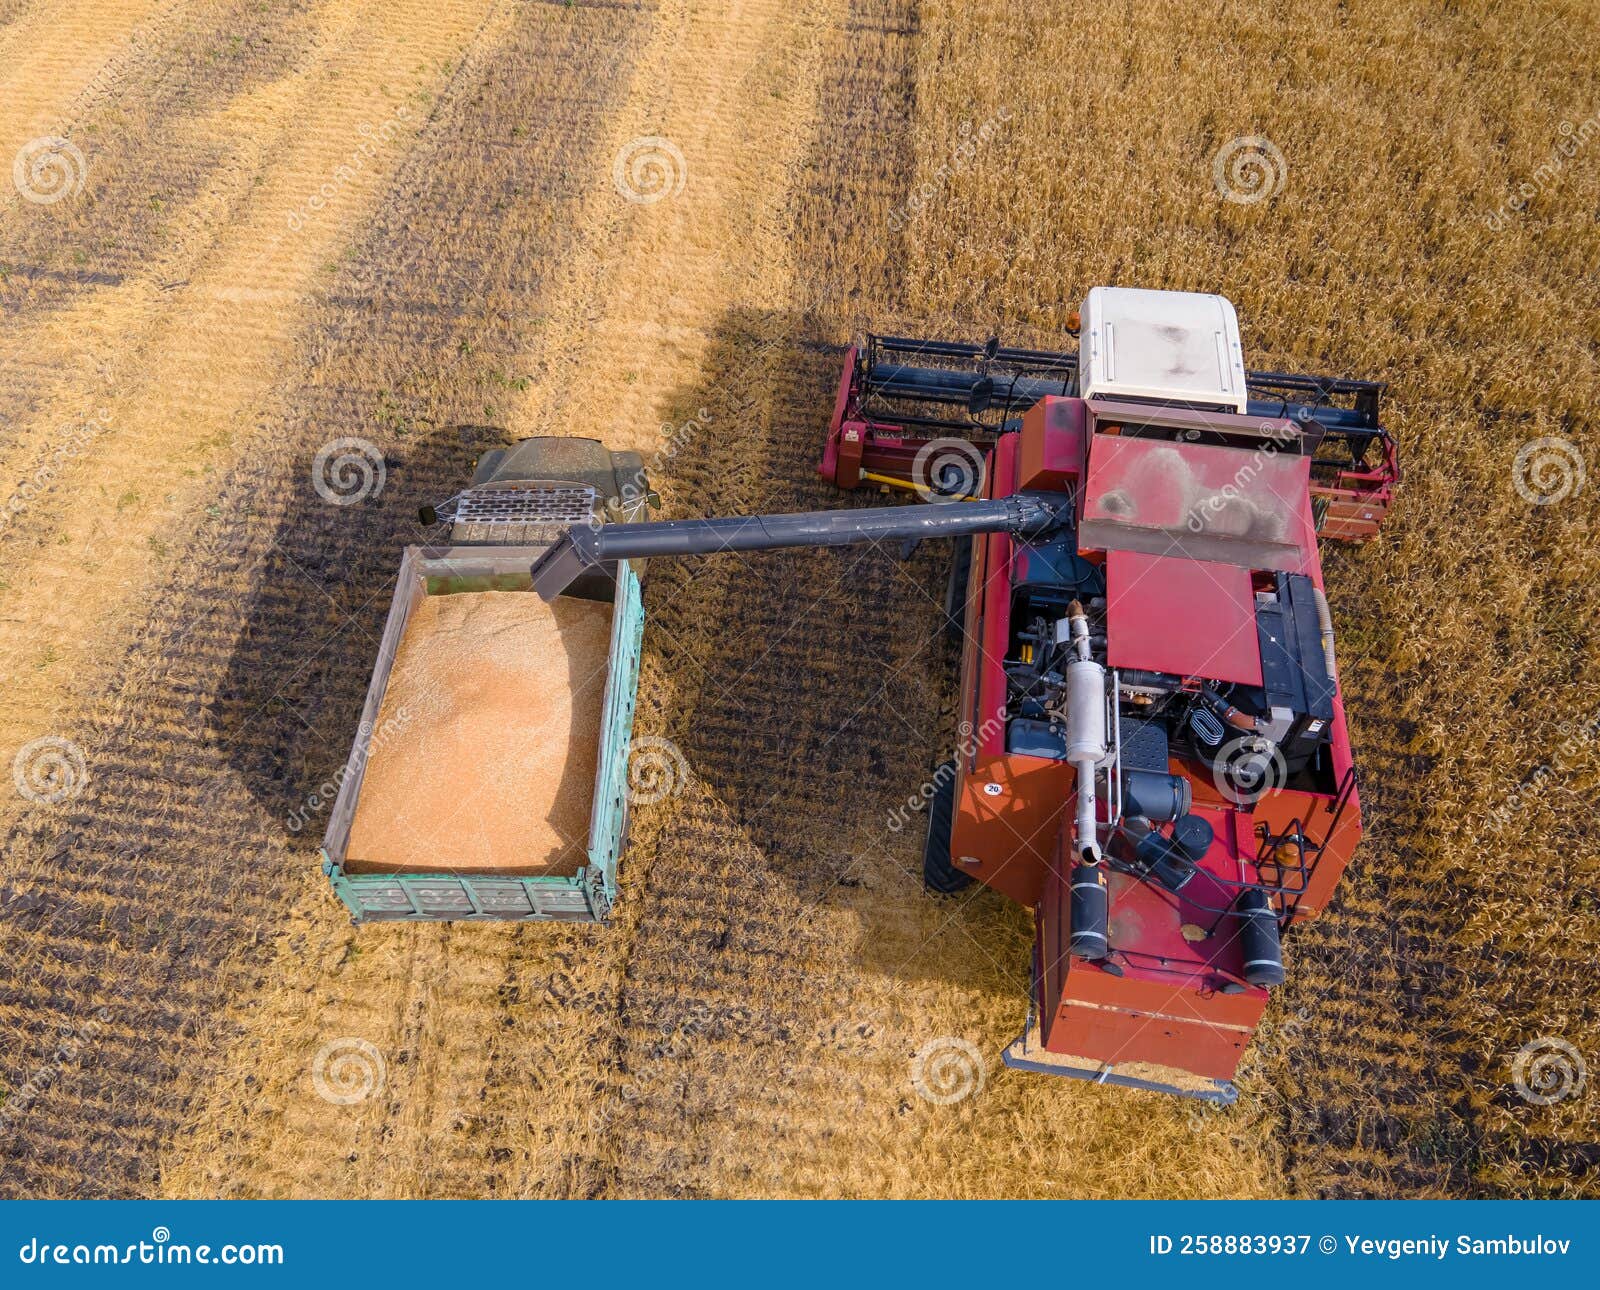 harvest wheat grain and crop aerial view.harvesting wheat,oats, barley in fields,ranches and farmlands.combines mow in the field.